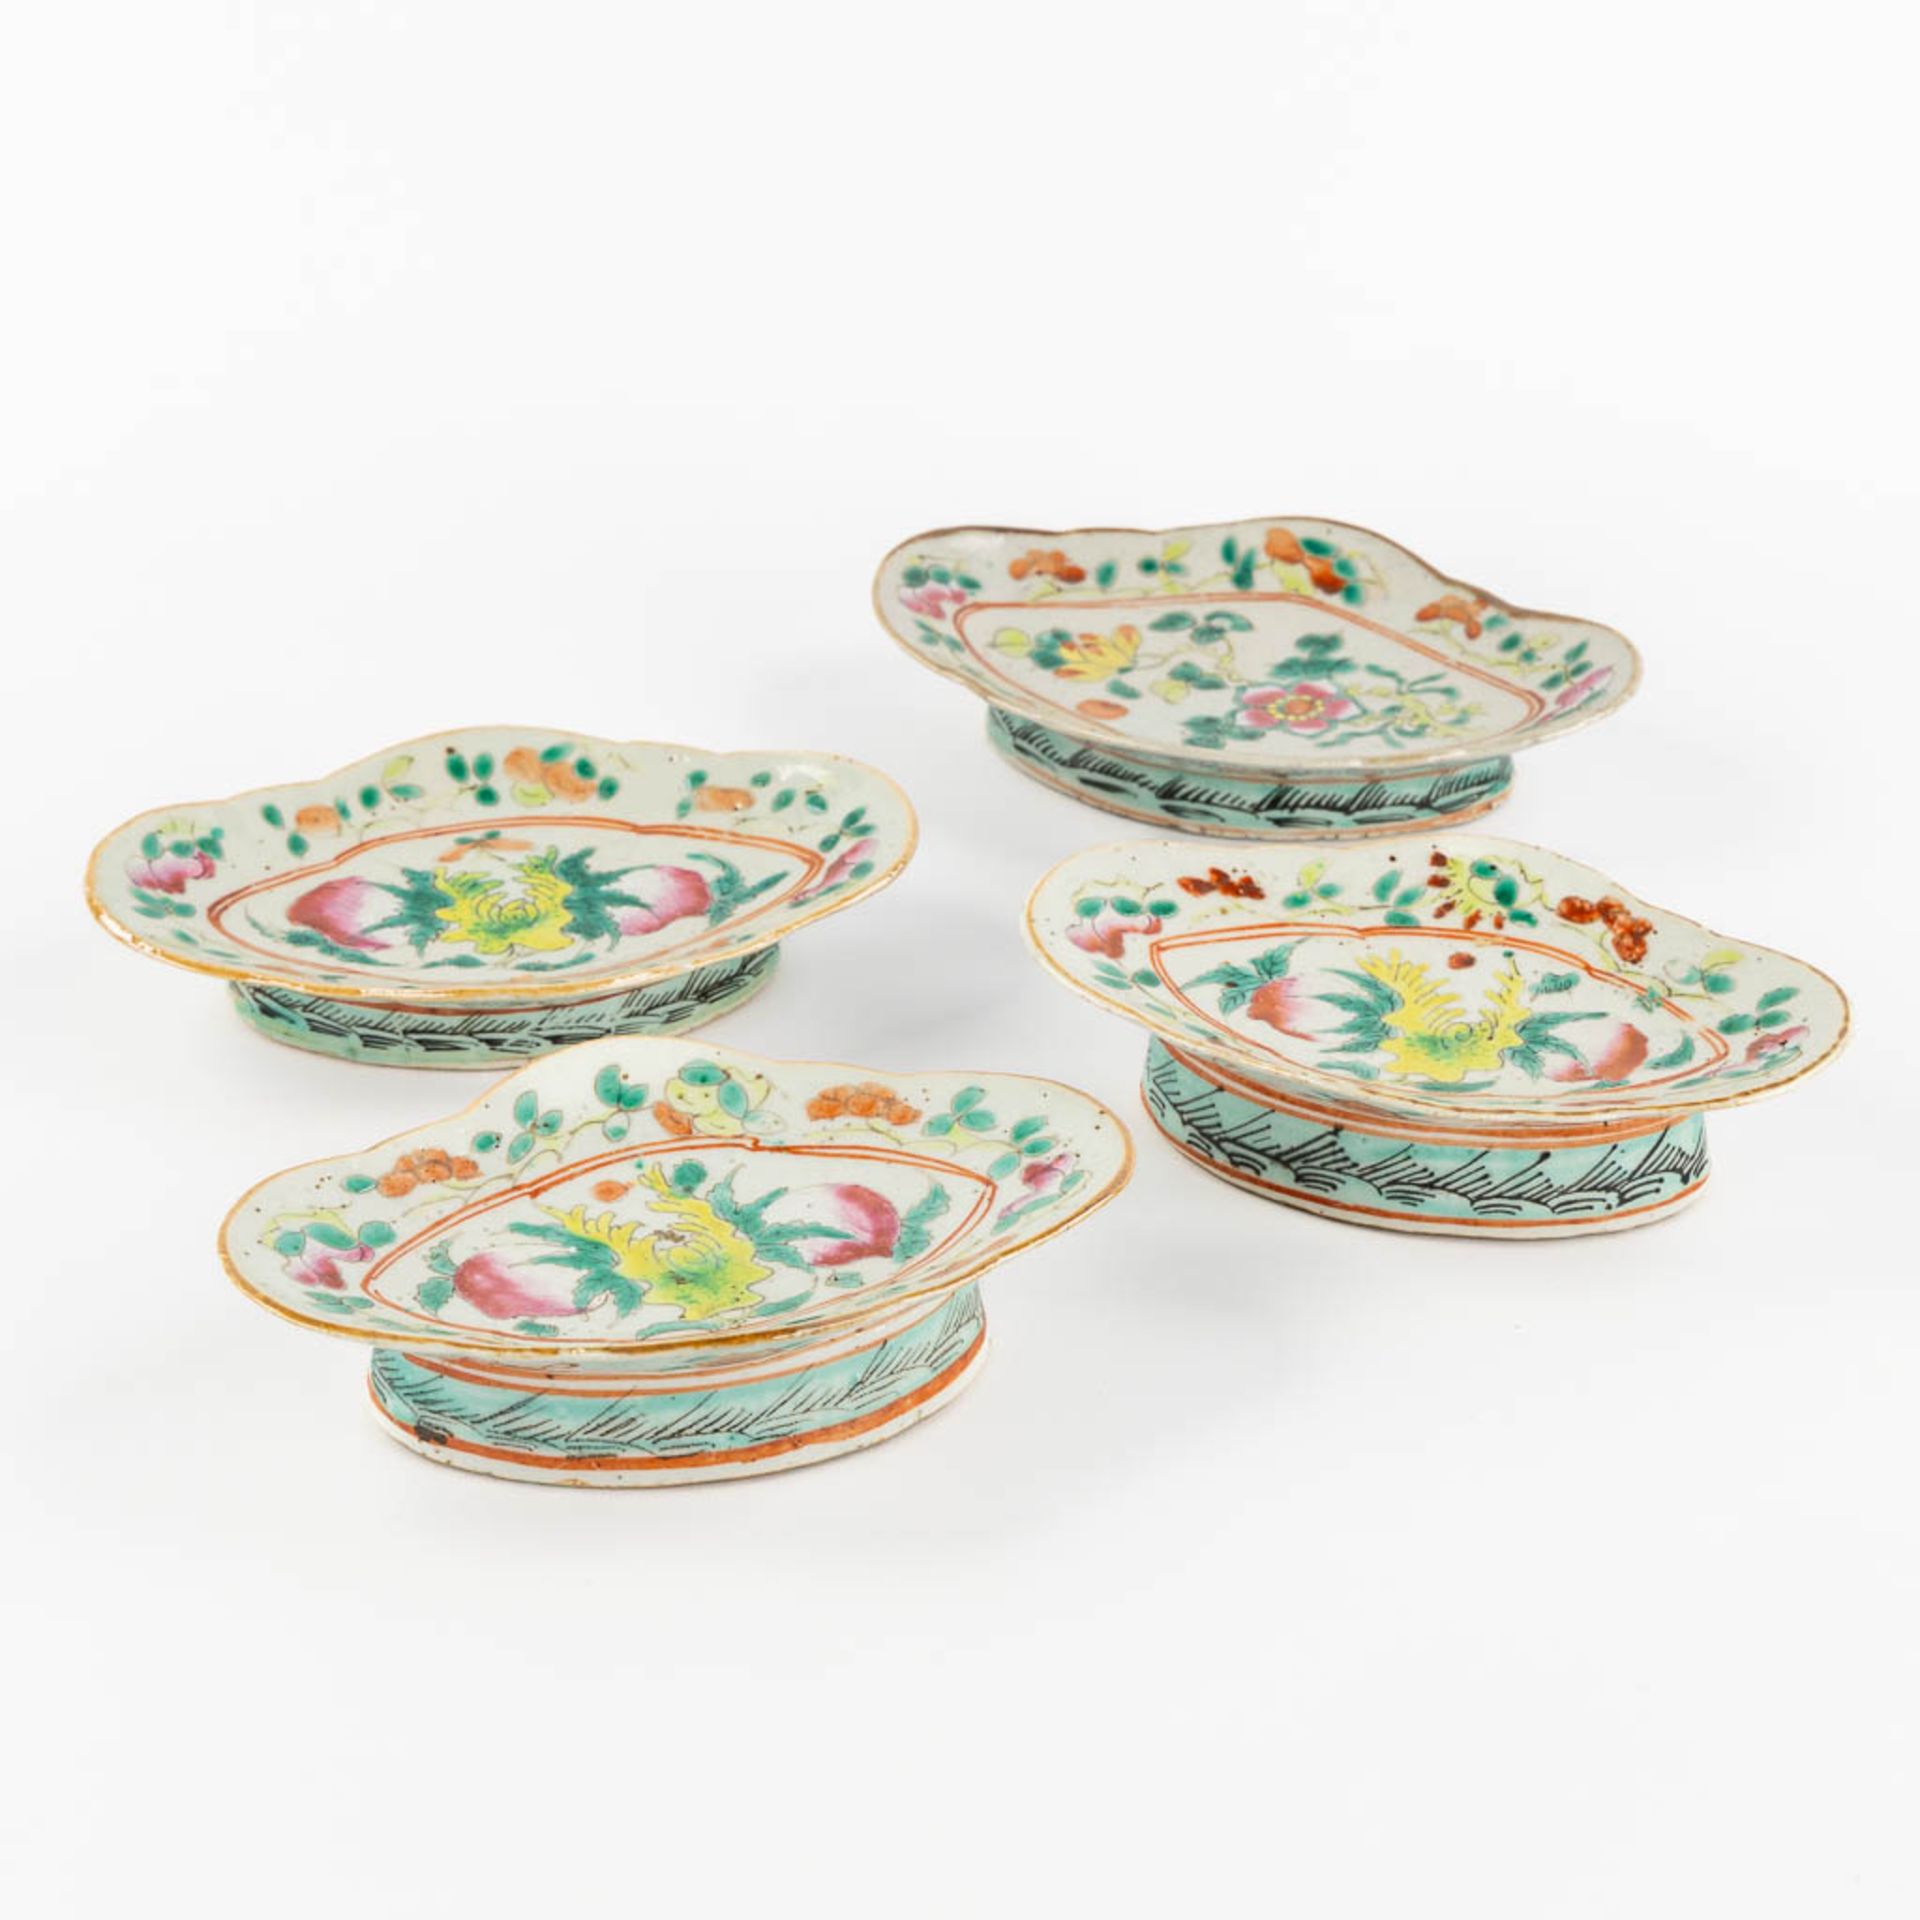 Four Oriental polychrome porcelain bowls, decorated with peaches and flowers. (L:12 x W:17 x H:4 cm)